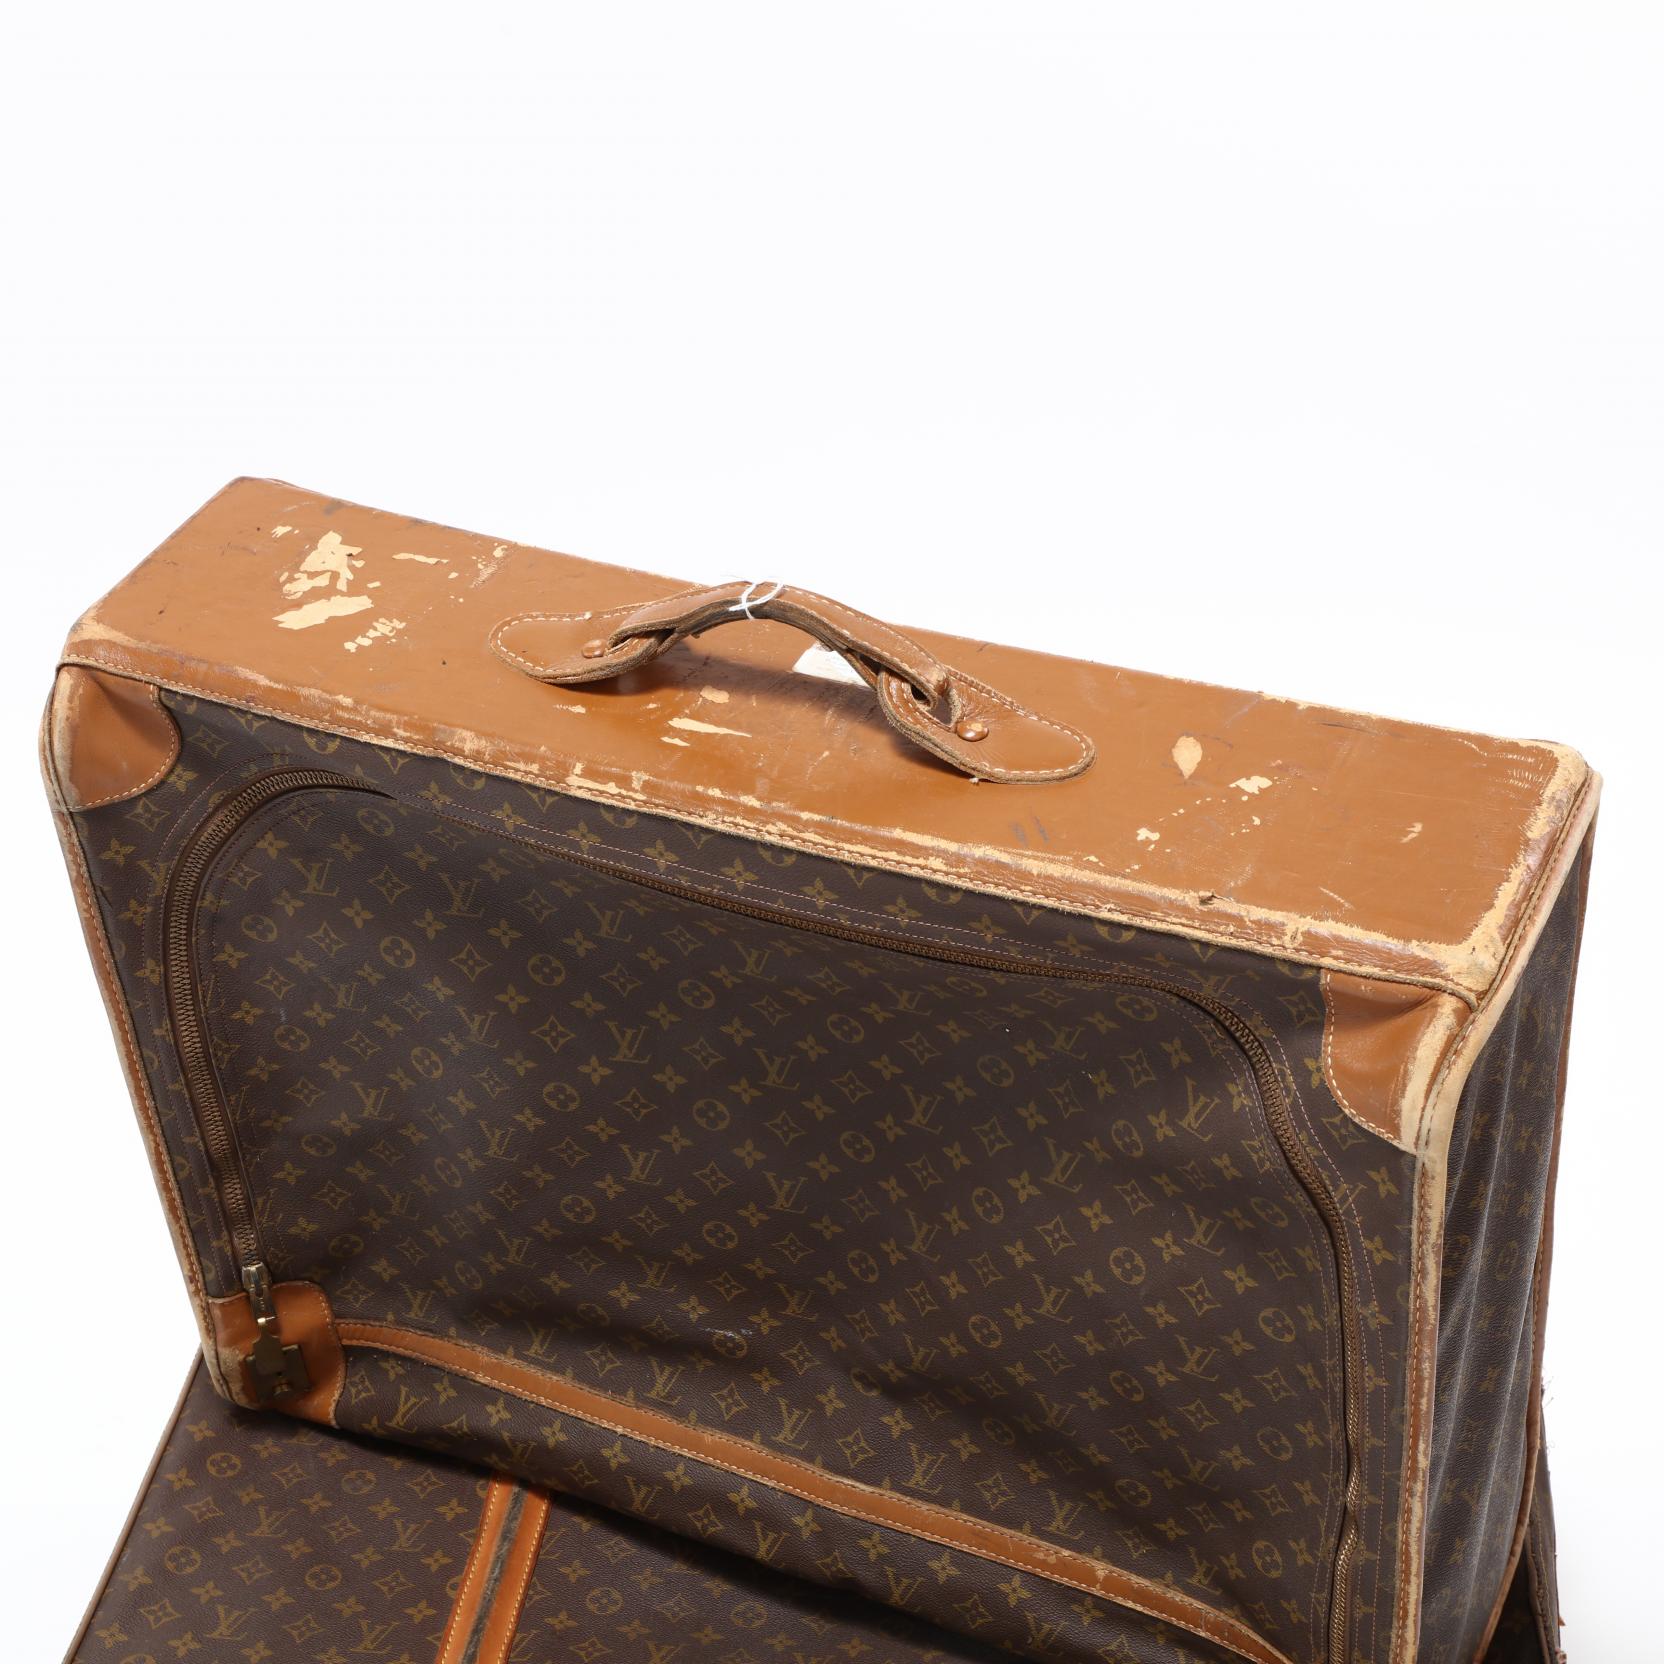 4 Pc.) Vintage Louis Vuitton Travel Set (Lot 332 - Holiday Weekend Gallery  AuctionApr 15, 2017, 10:00am)